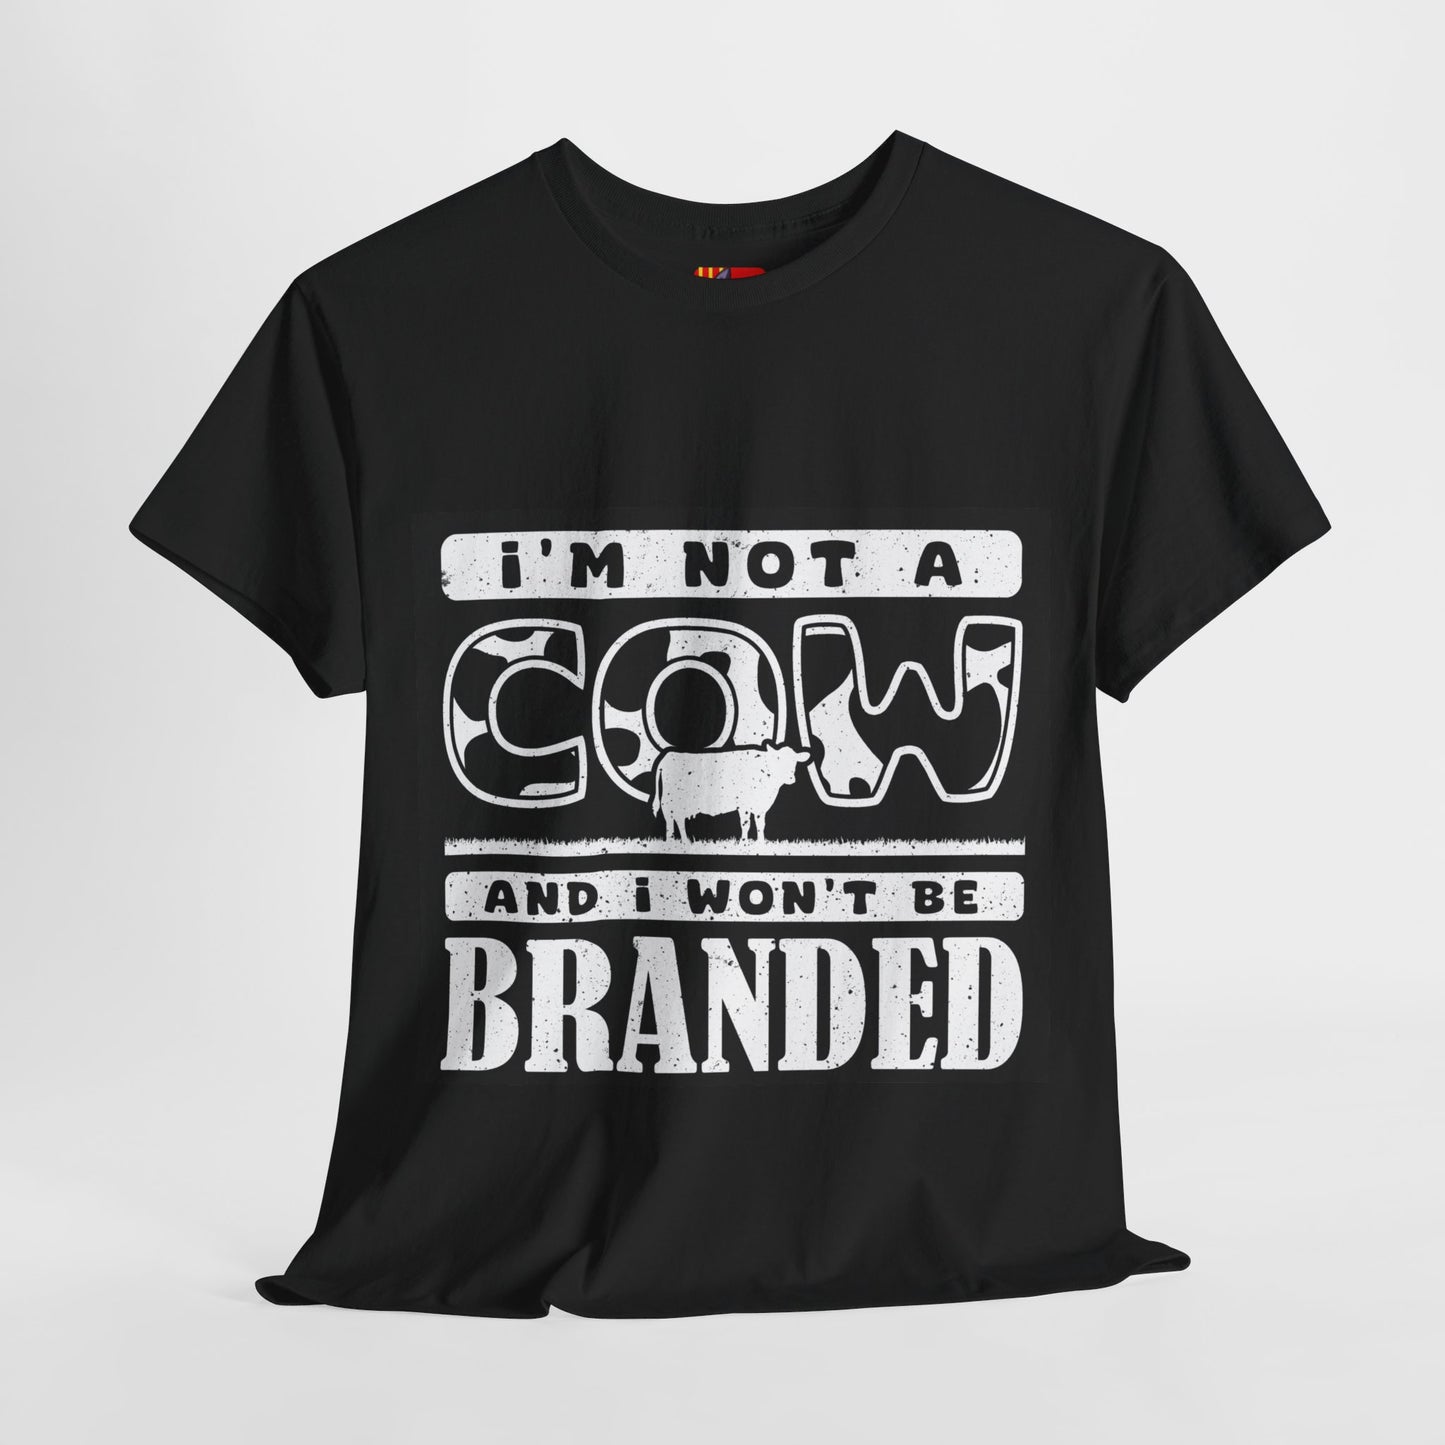 The Free Thinker T-Shirt: I'm not a cow and I won't be branded